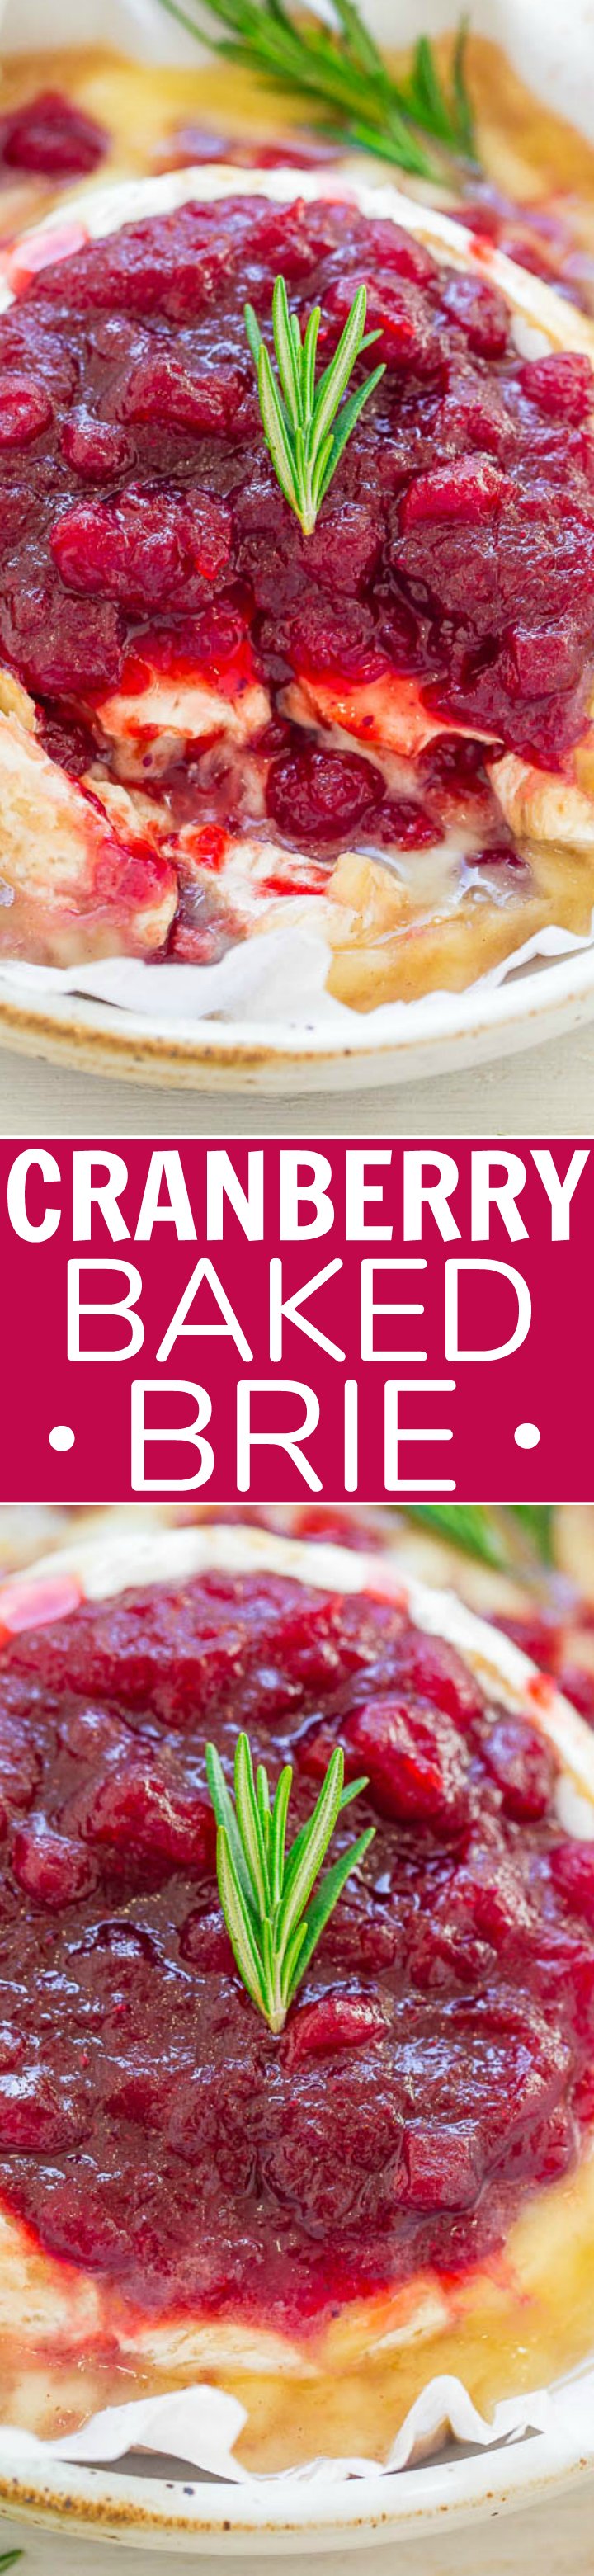 Cranberry Baked Brie - EASY, 15-minute appetizer that's filled AND topped with richly spiced orange-scented cranberry sauce!! Perfect for holiday entertaining! Salty, tart-yet-sweet, and IRRESISTIBLE!!